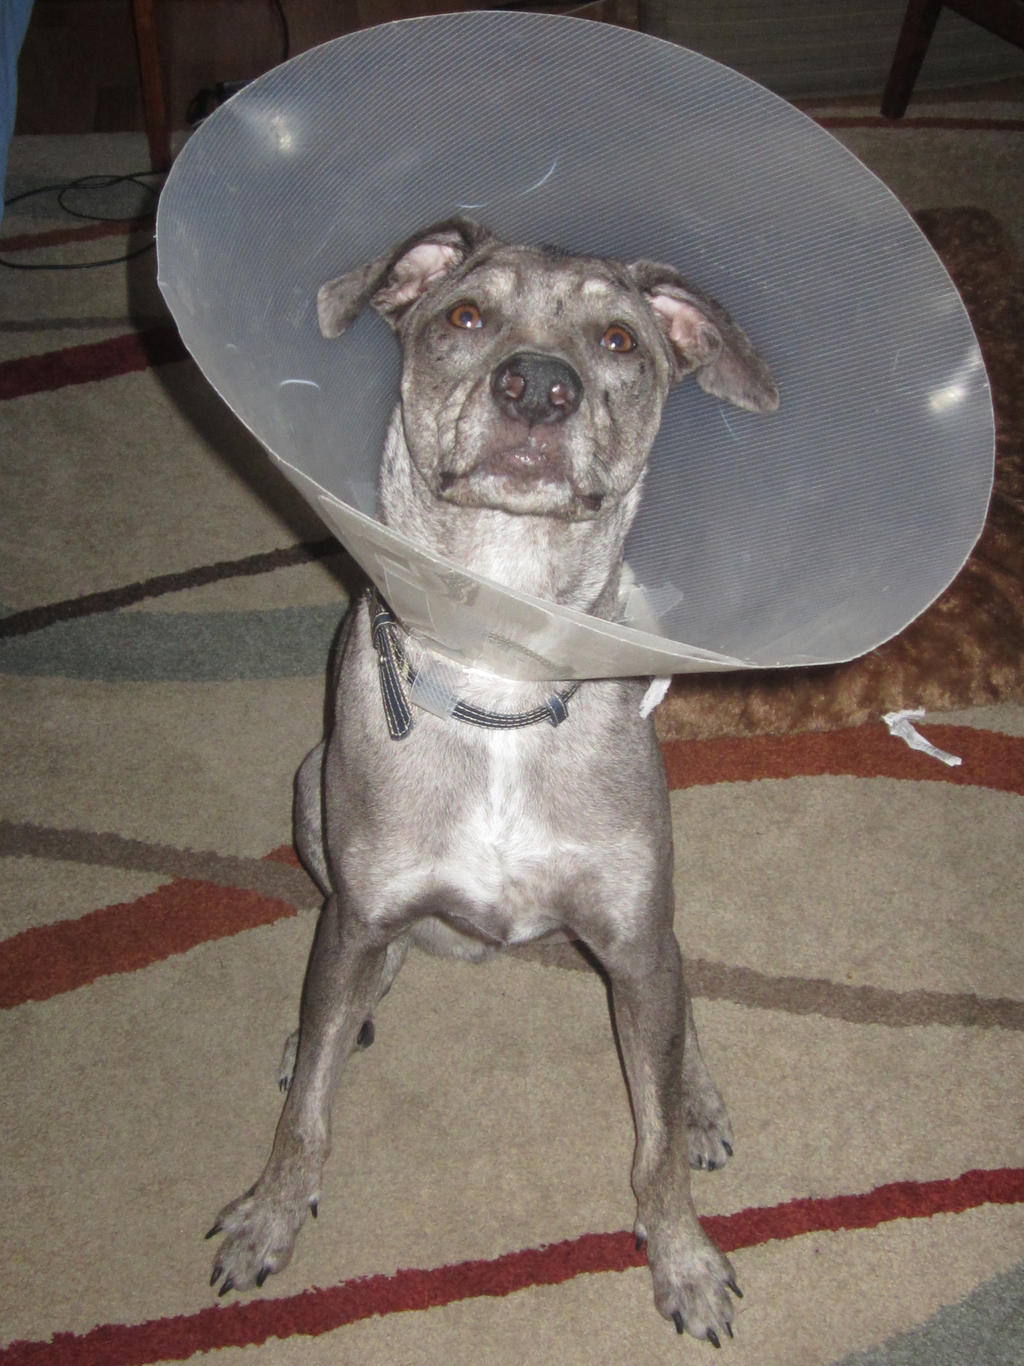 Rock'n the cone of shame